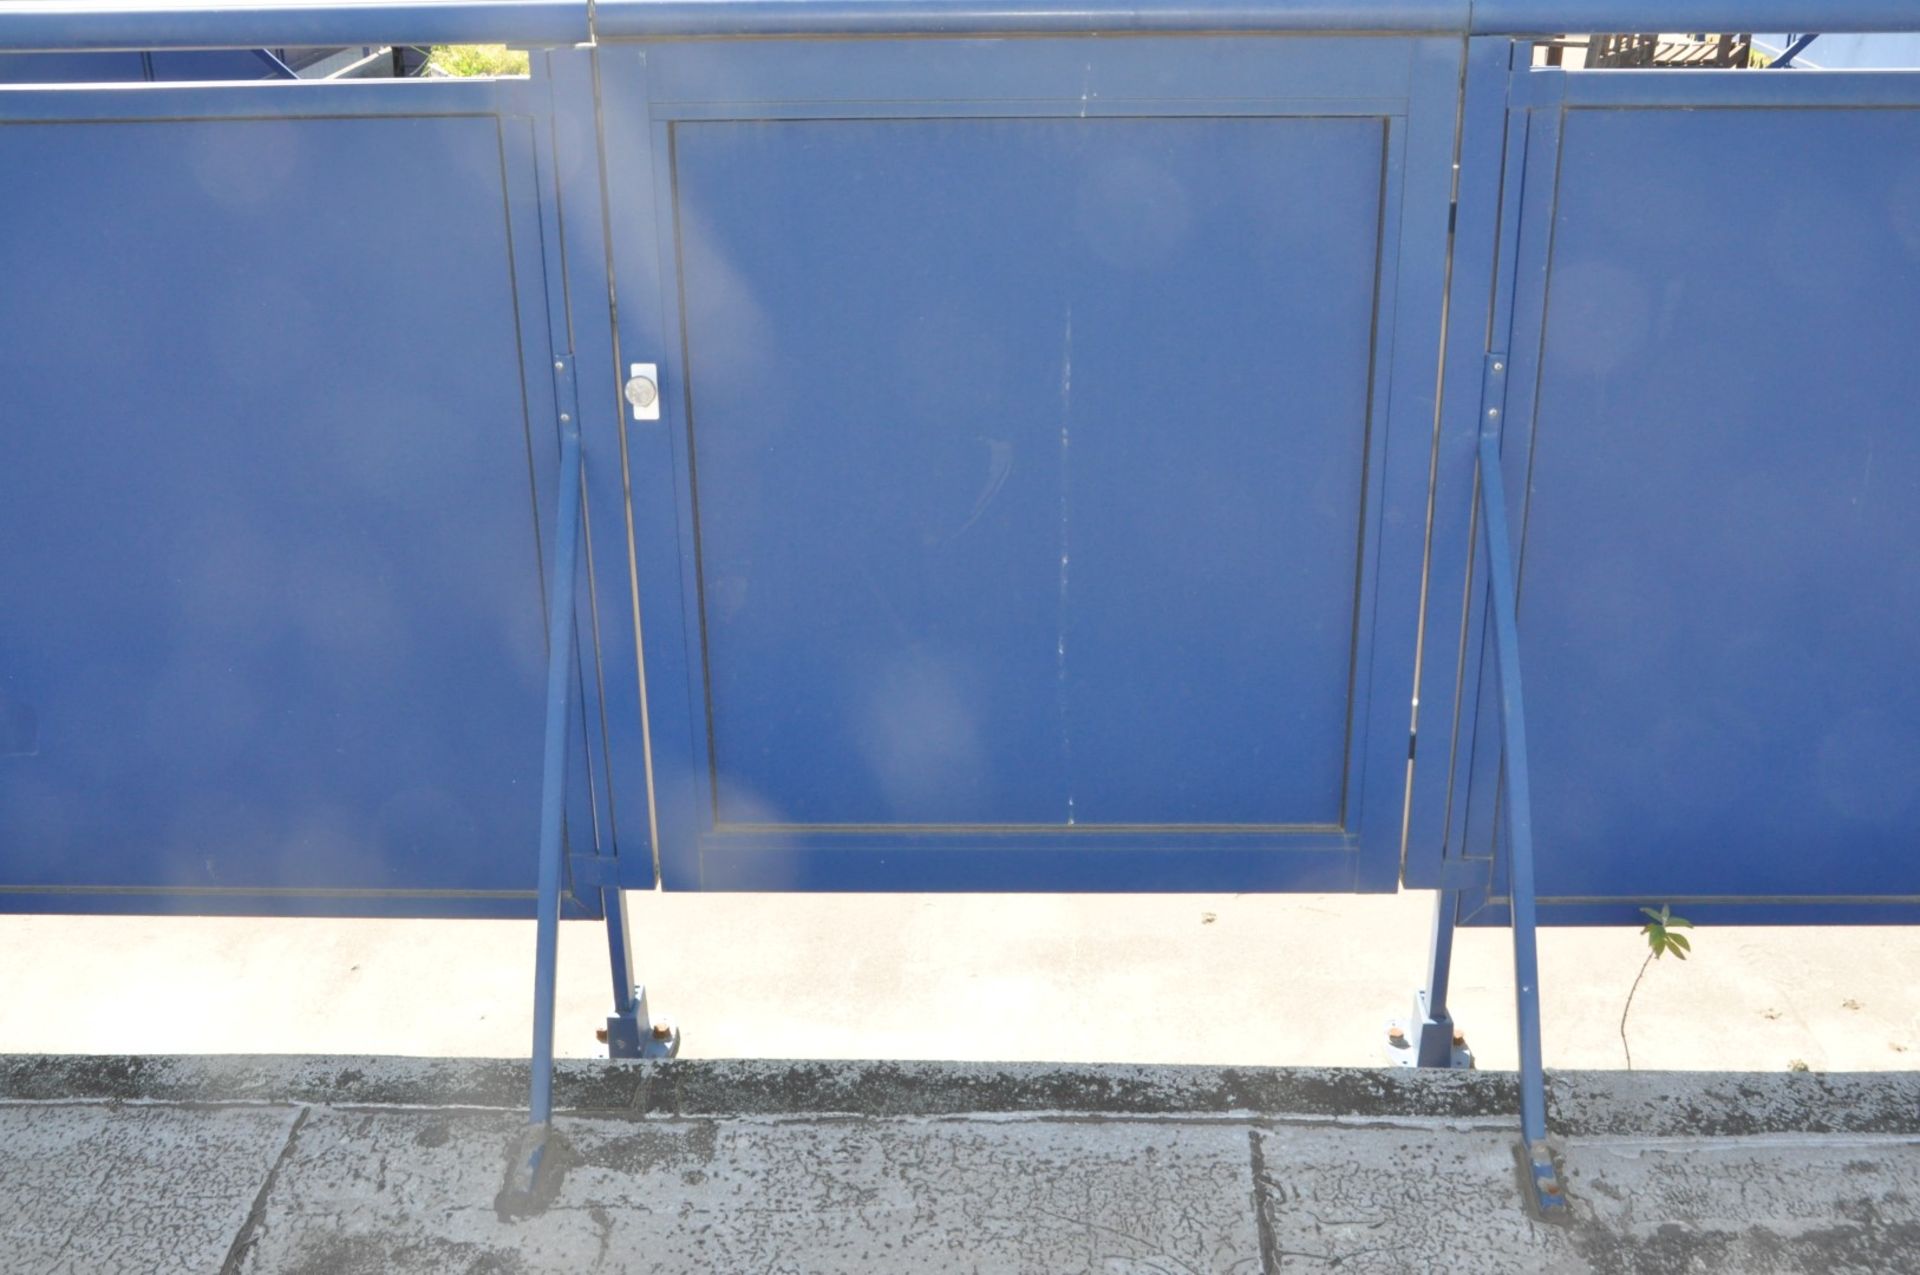 1 x Large Collection of Rooftop Safety Barrier Railings - Blue Steel Railings With Supports and - Image 6 of 10